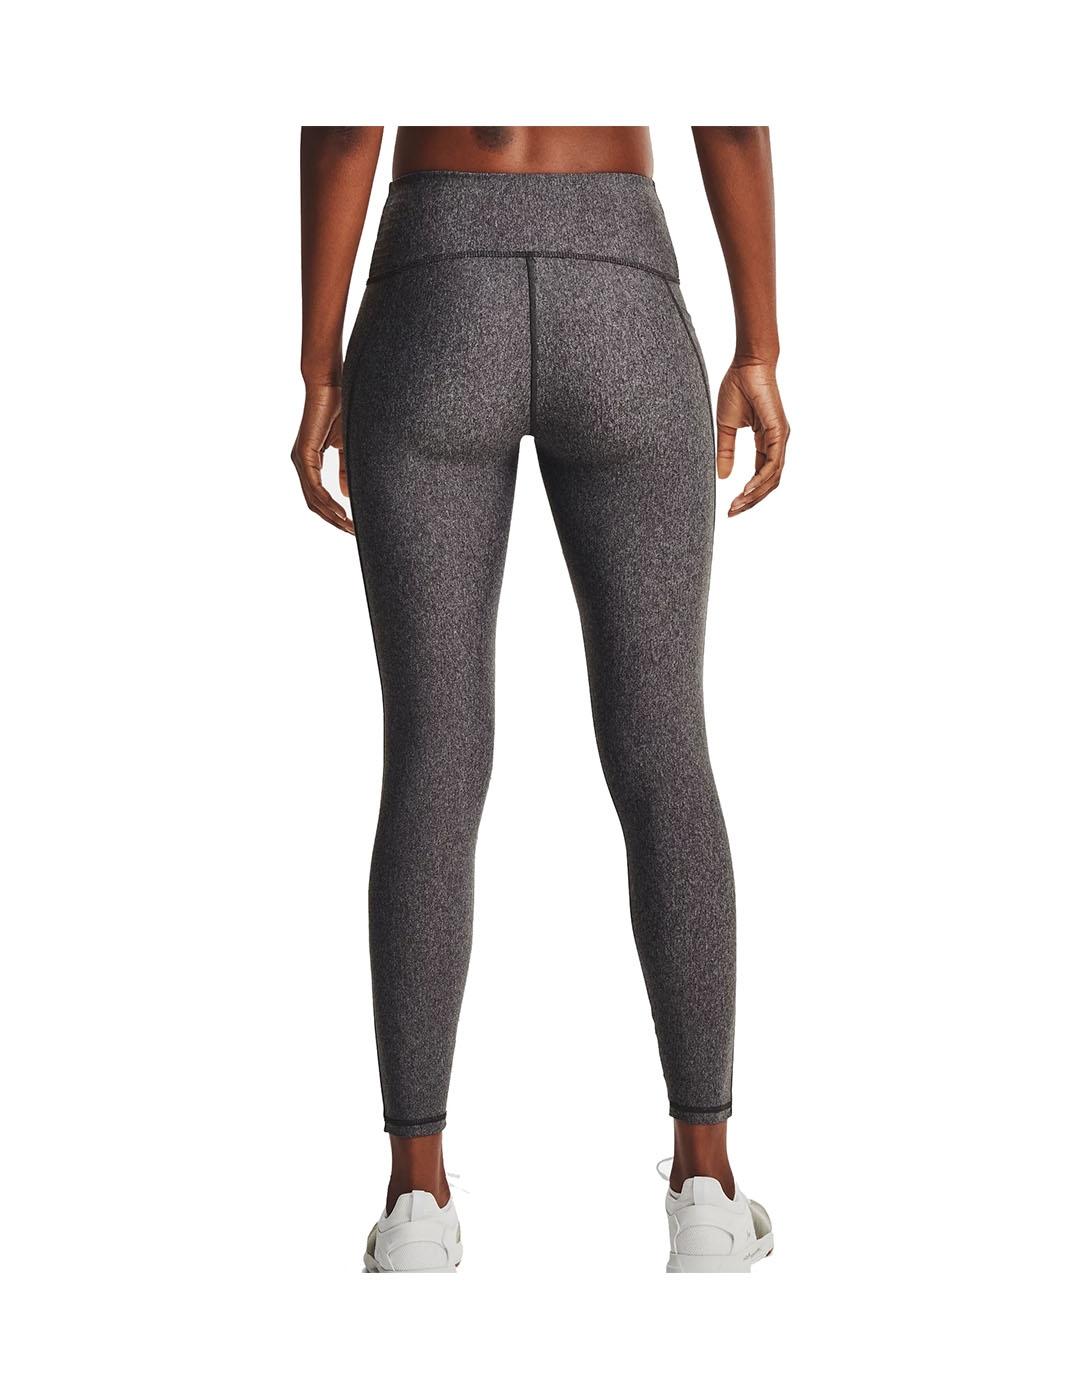 Malla Mujer Under Armour HiRise Gris